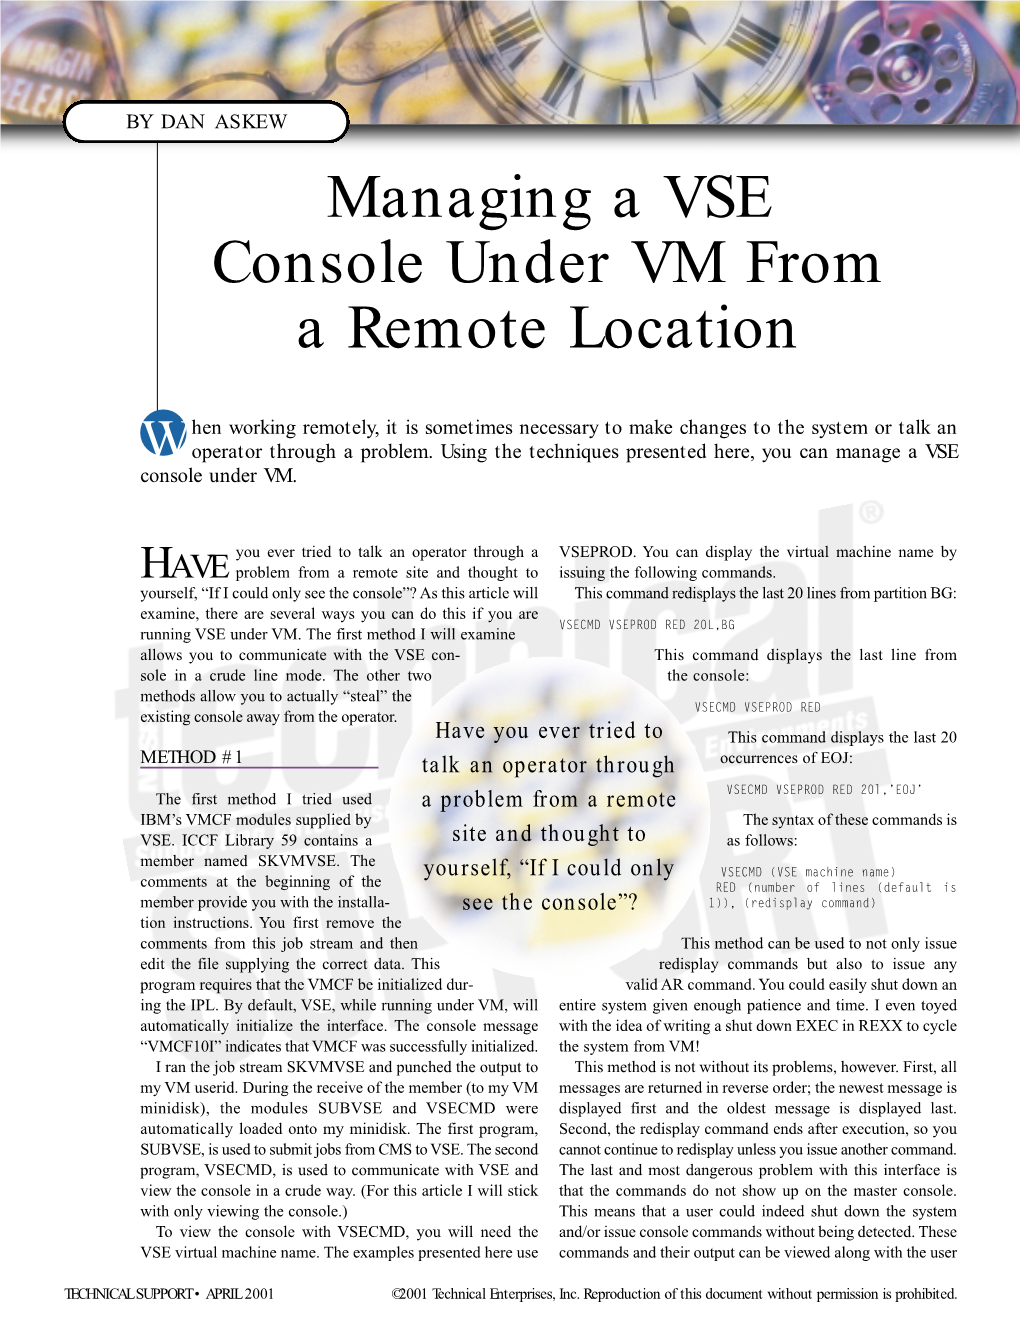 Managing a VSE Console Under VM from a Remote Location